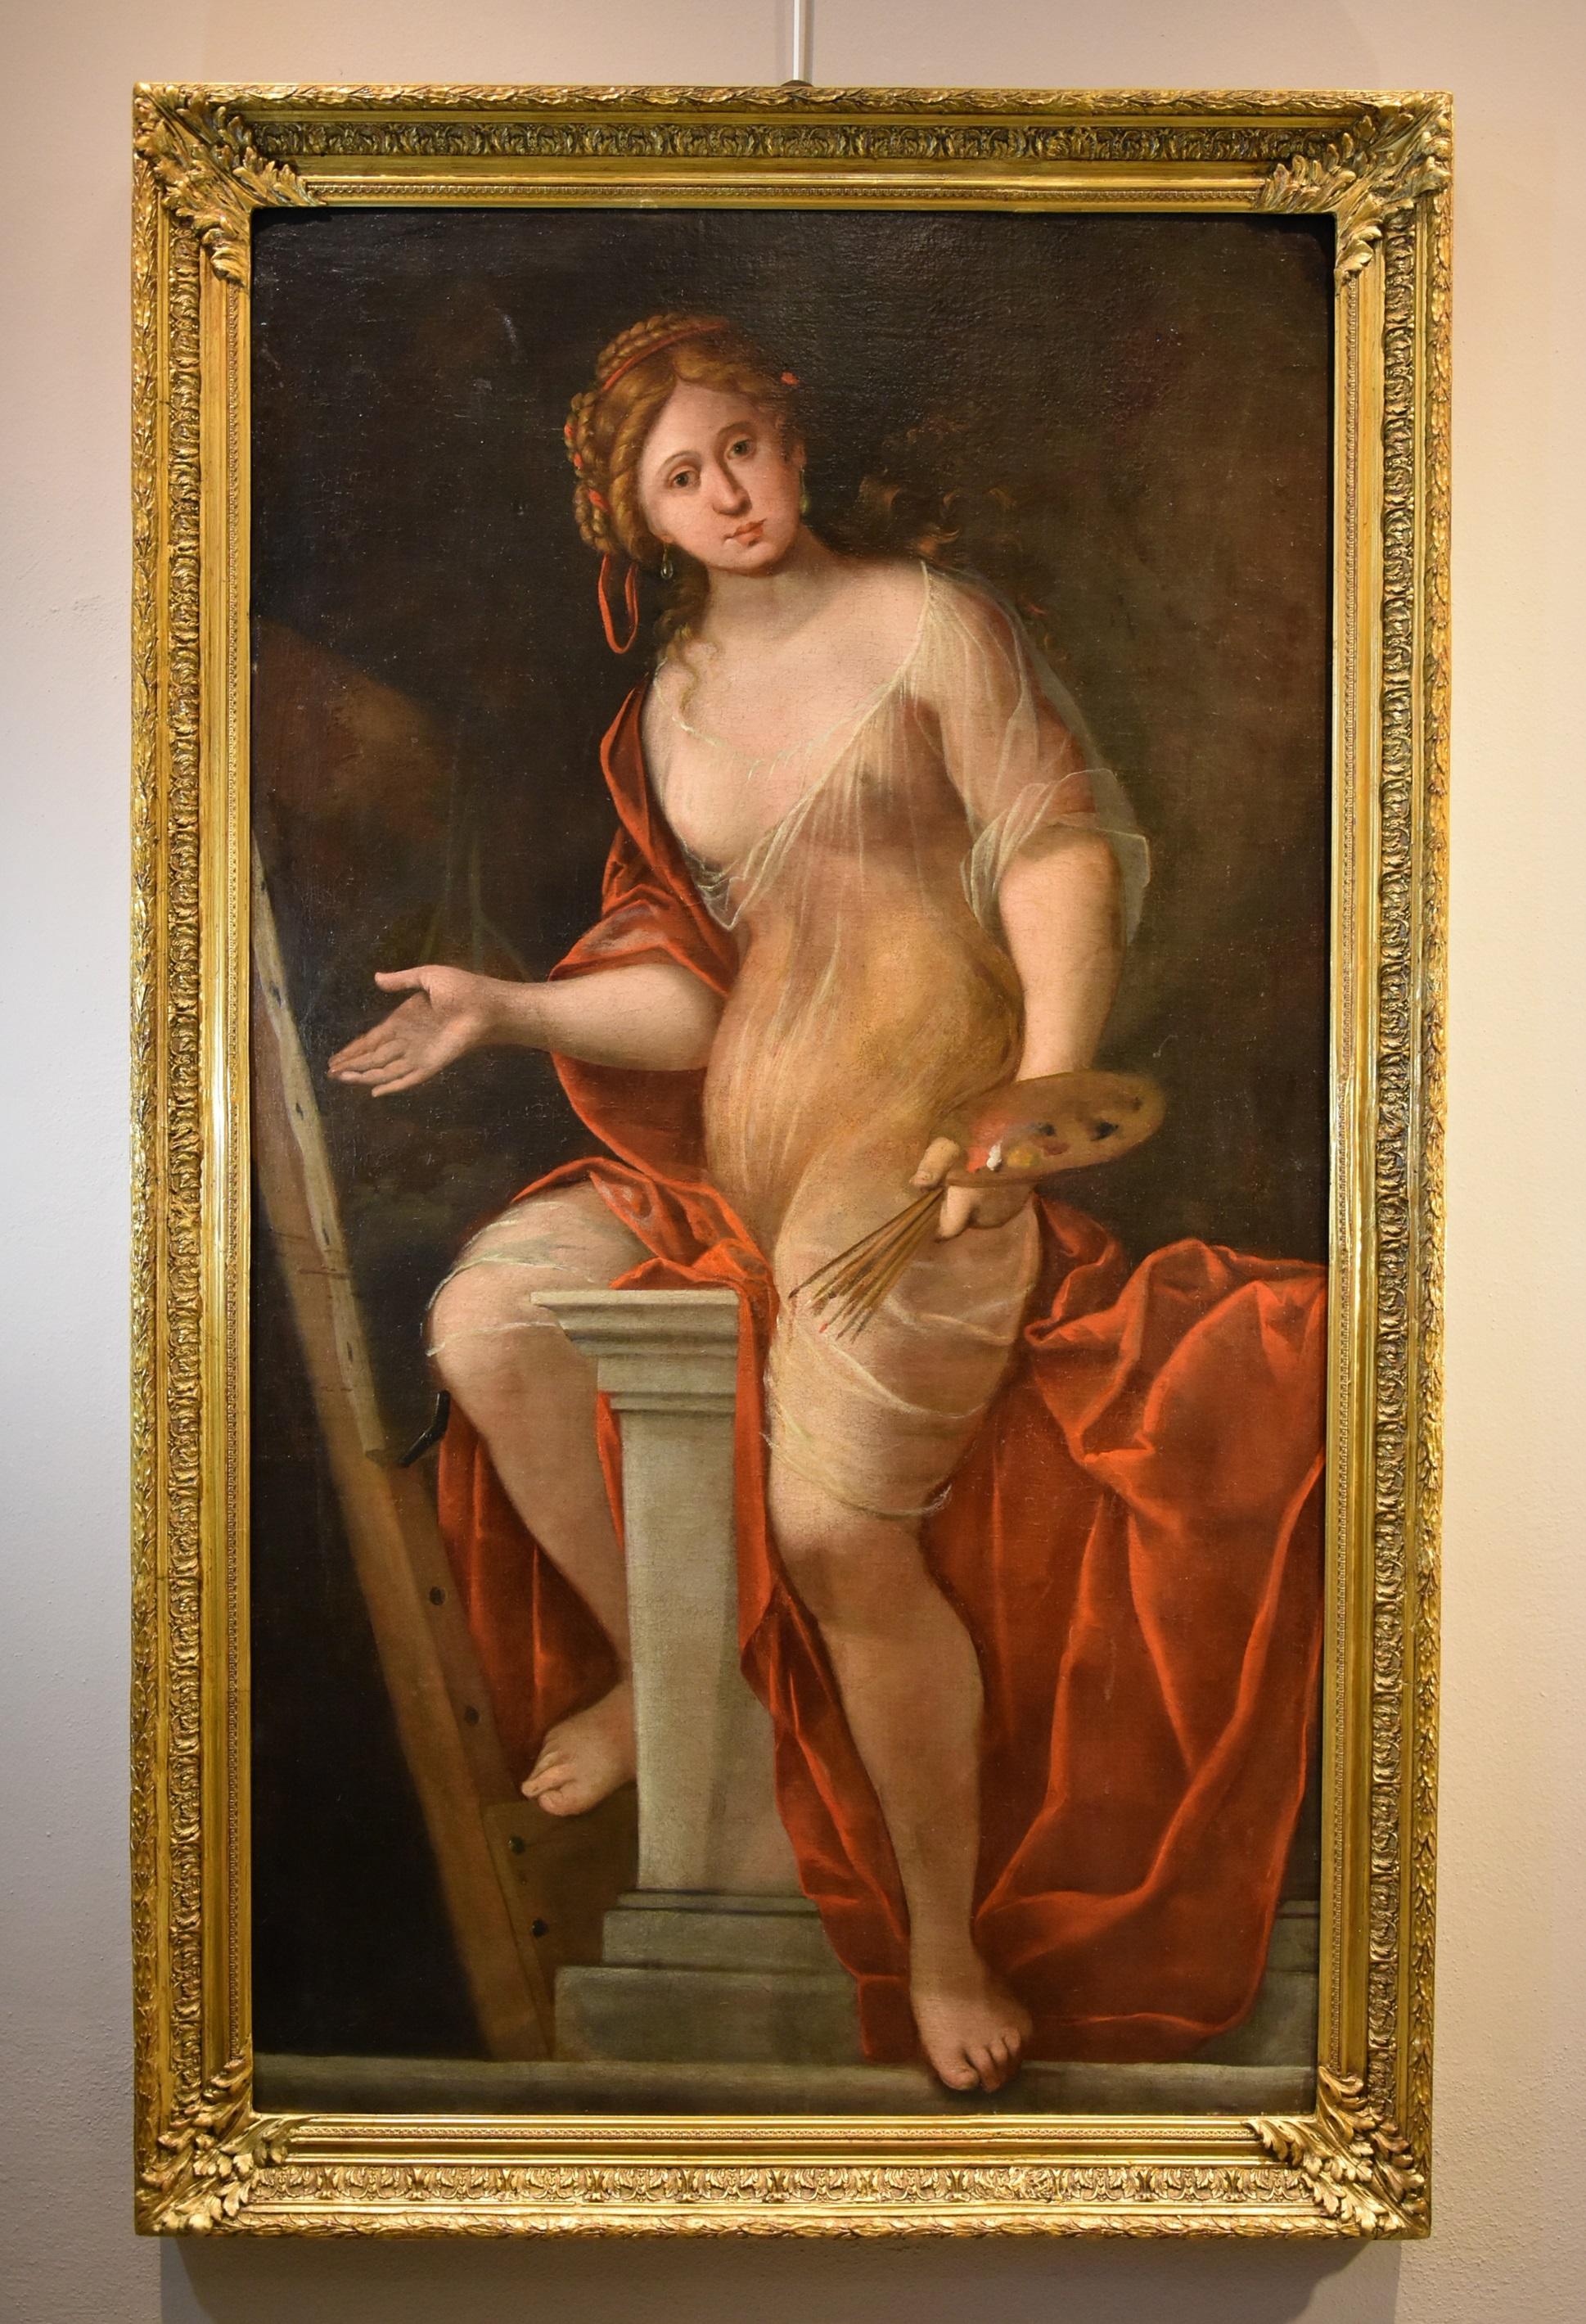 Terwesten Woman Allegory Art Paint Oil on canvas 17/18th Century Old master  - Painting by Mattheus Terwesten (the Hague, 1670 - 1757)